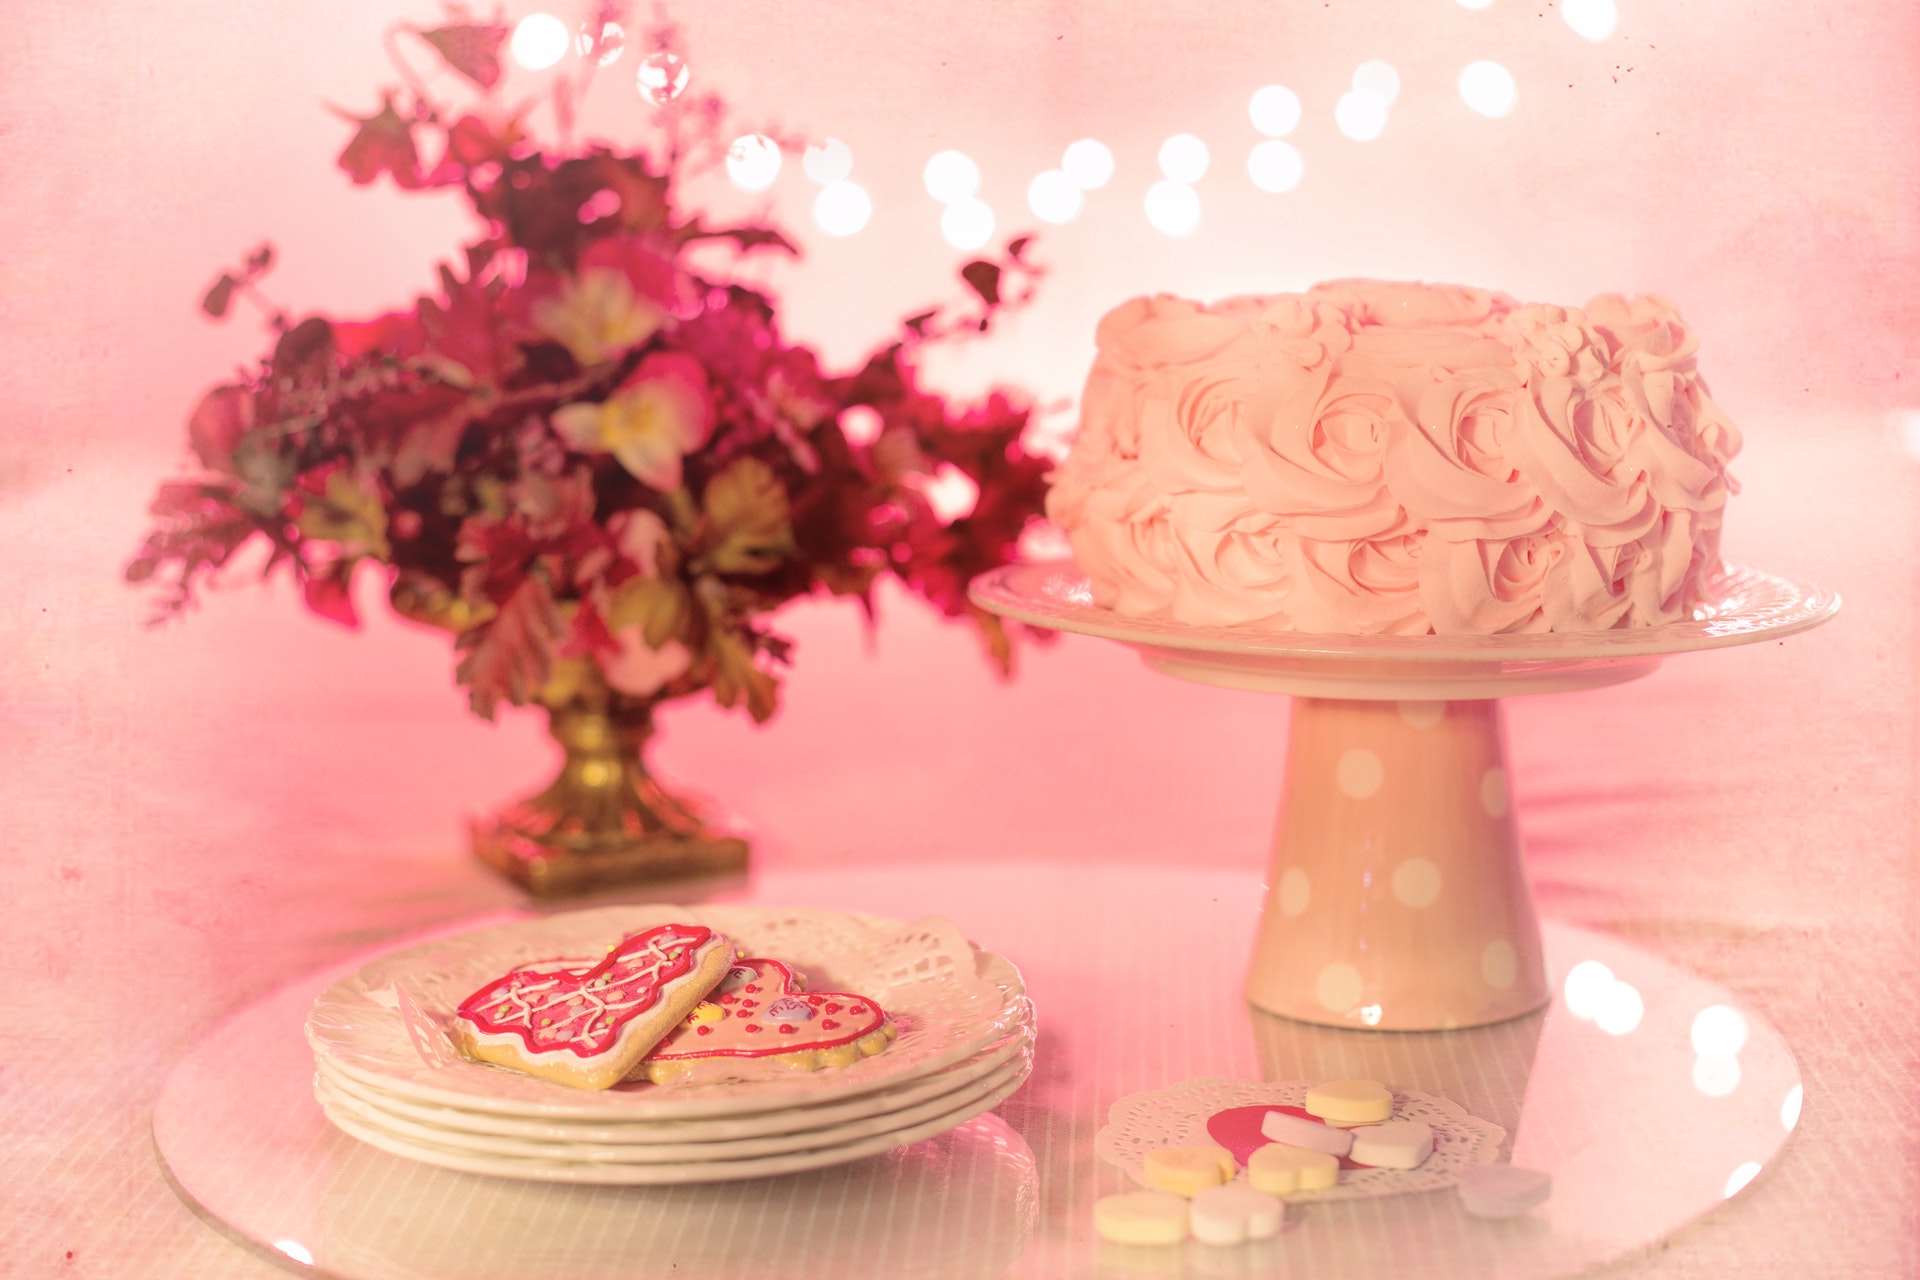 14 Delicious and Adorable Valentine's Cake Ideas to make your day special